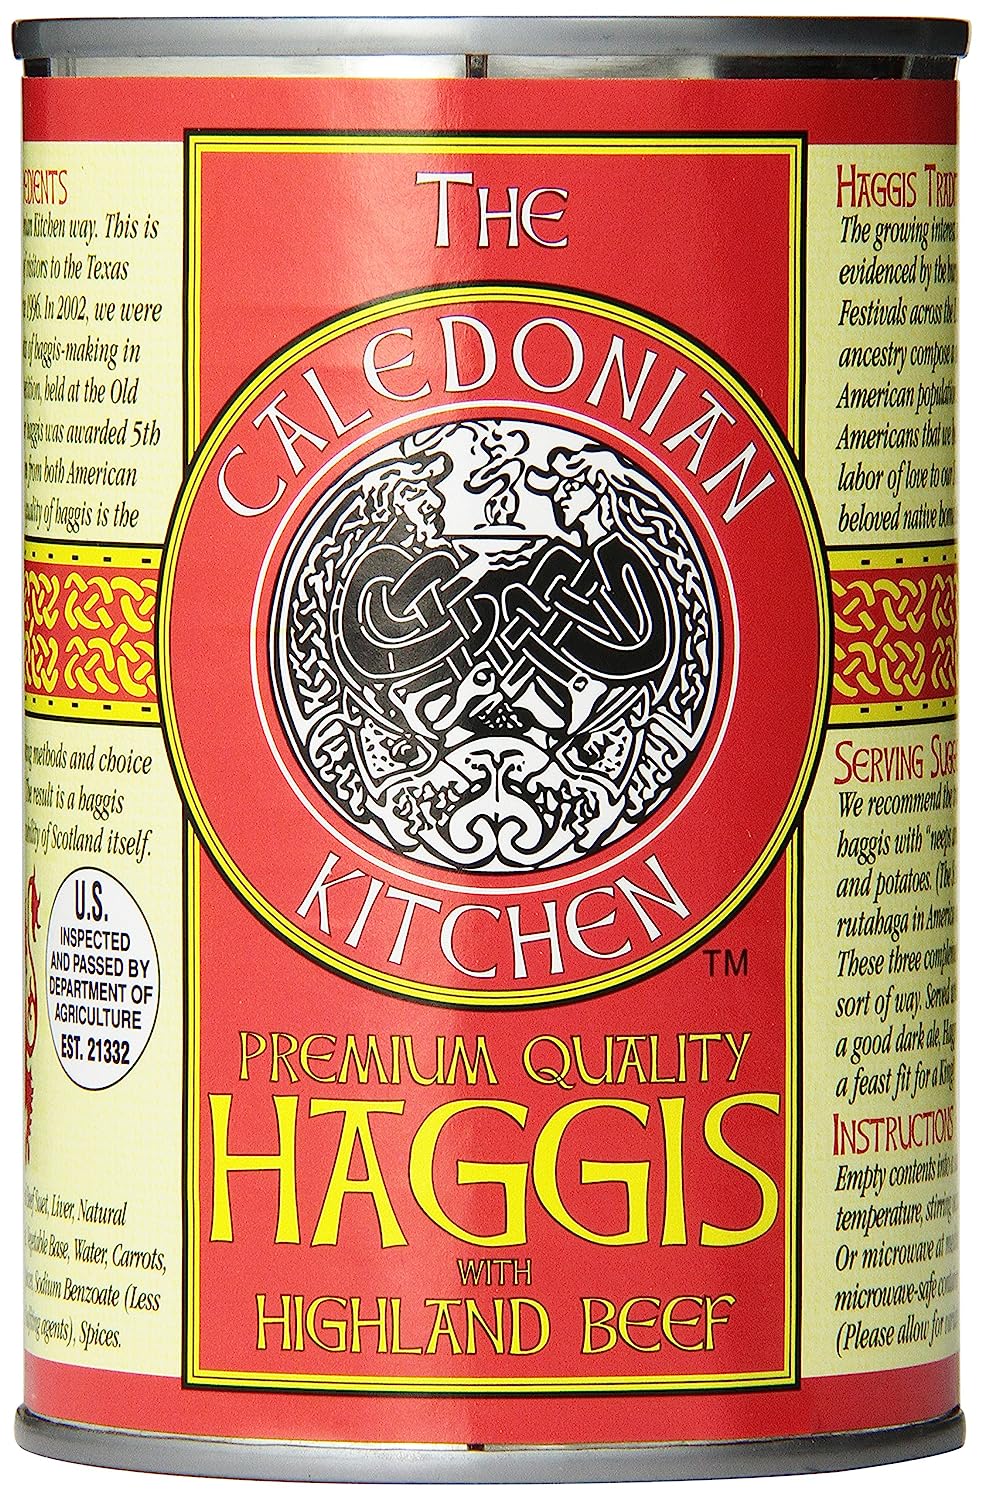 Caledonian Kitchen Haggis - Canned & Packaged Spiced Meats